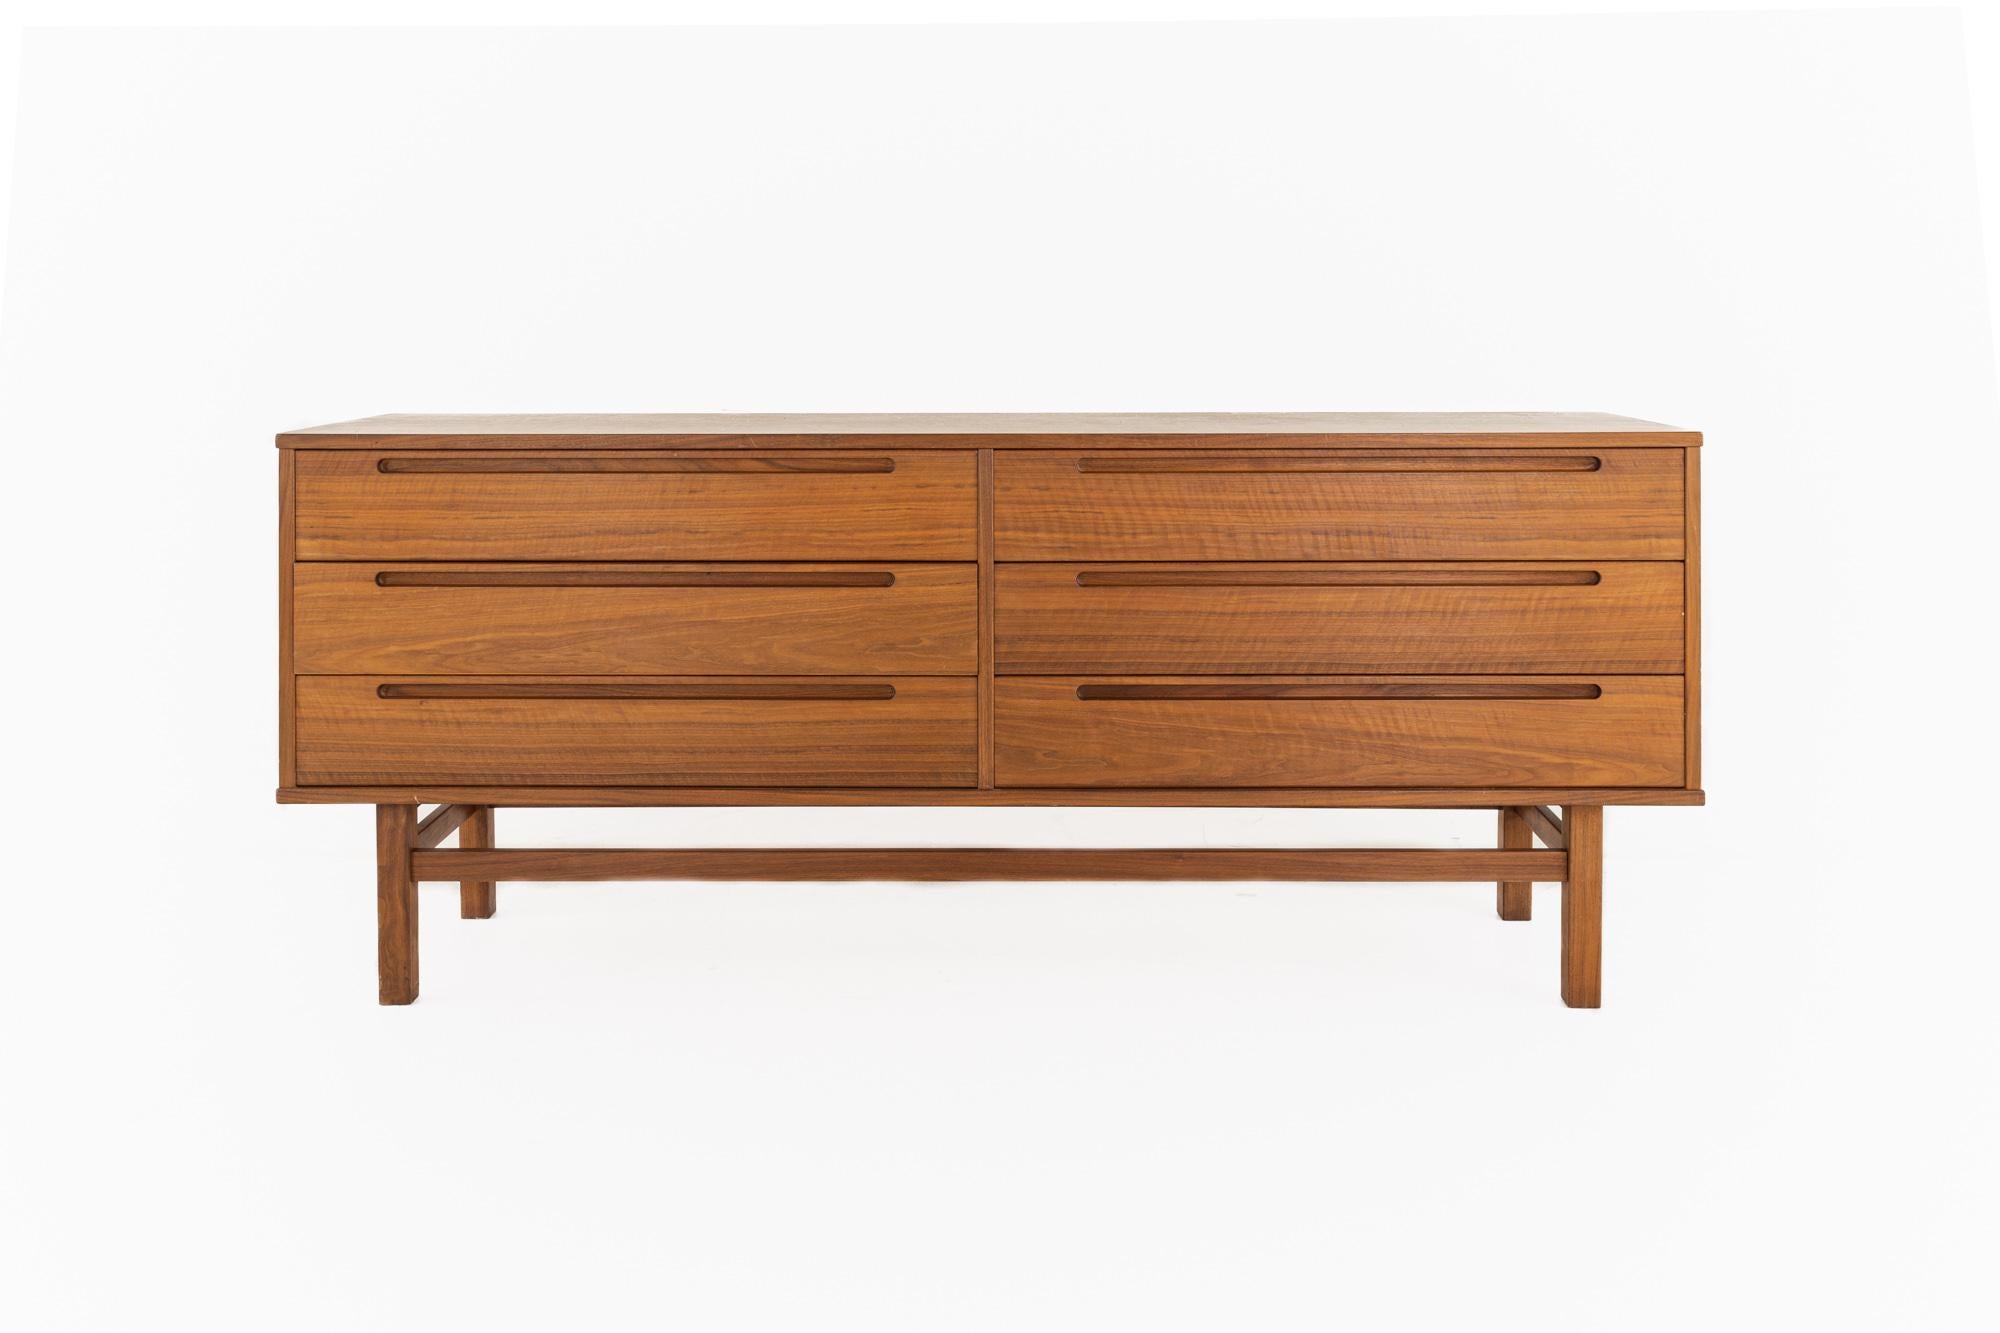 Nils Johnsson for Torring mid century danish teak 6 drawer lowboy dresser

This dresser measures: 71 wide x 17.5 deep x 29 inches high

All pieces of furniture can be had in what we call restored vintage condition. That means the piece is